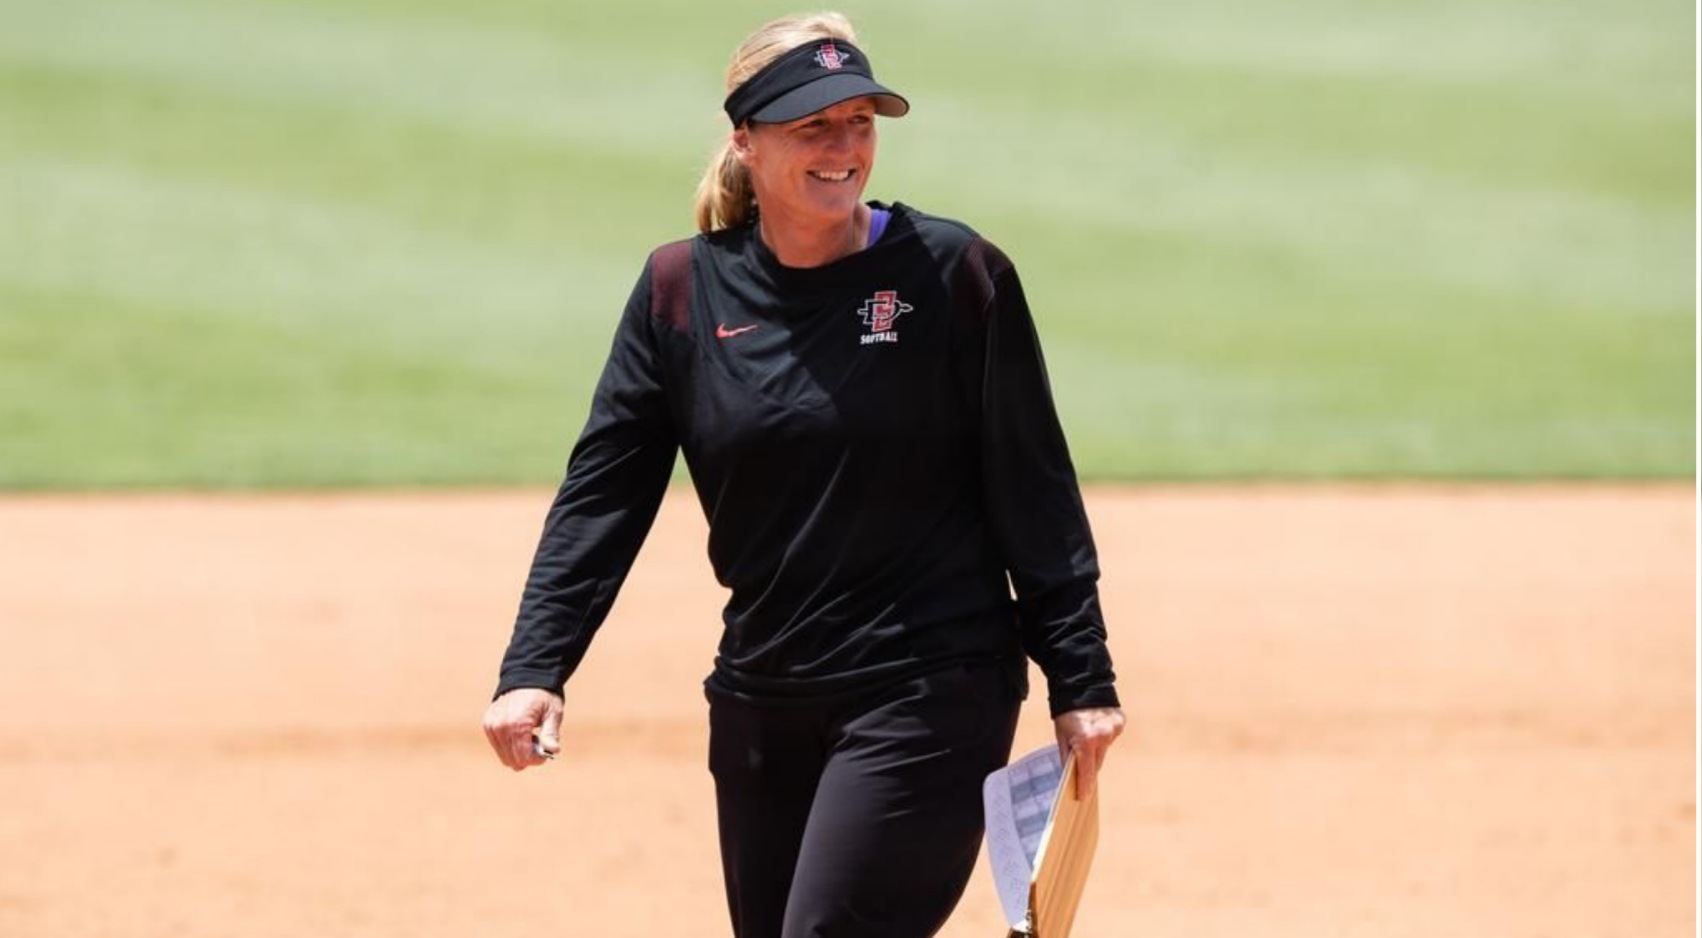 SDSU is playing in its 13th NCAA tournament and second straight under second-year head coach Stacey Nuveman Deniz. (Derrick Tuskan/San Diego State)